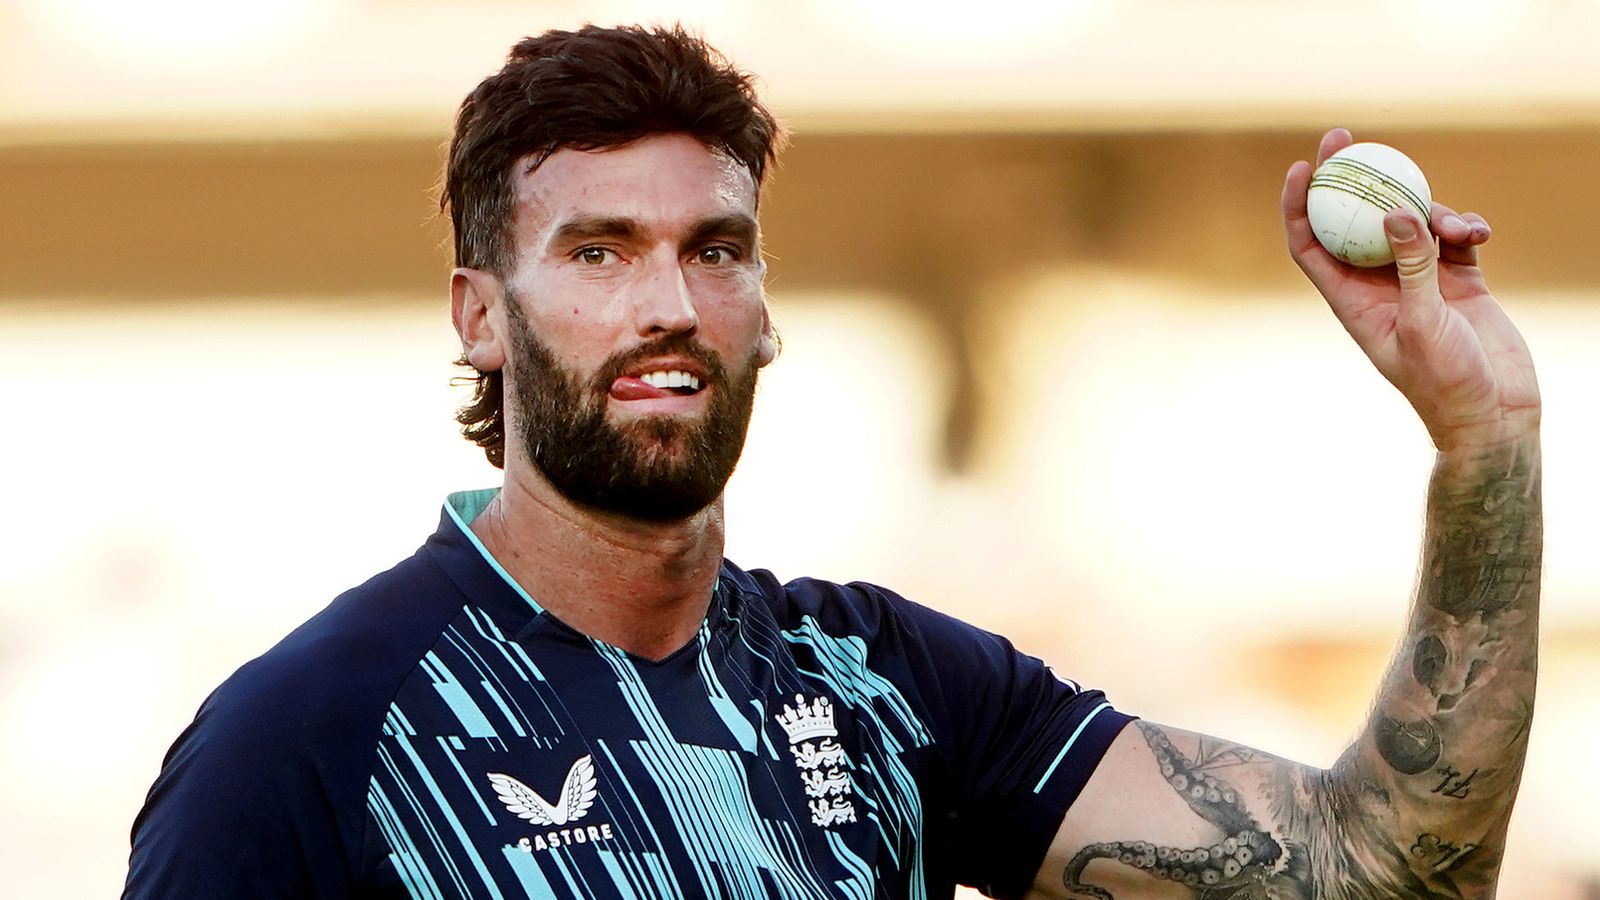 England and India head into ODI series decider as new star Reece Topley looks to shine again